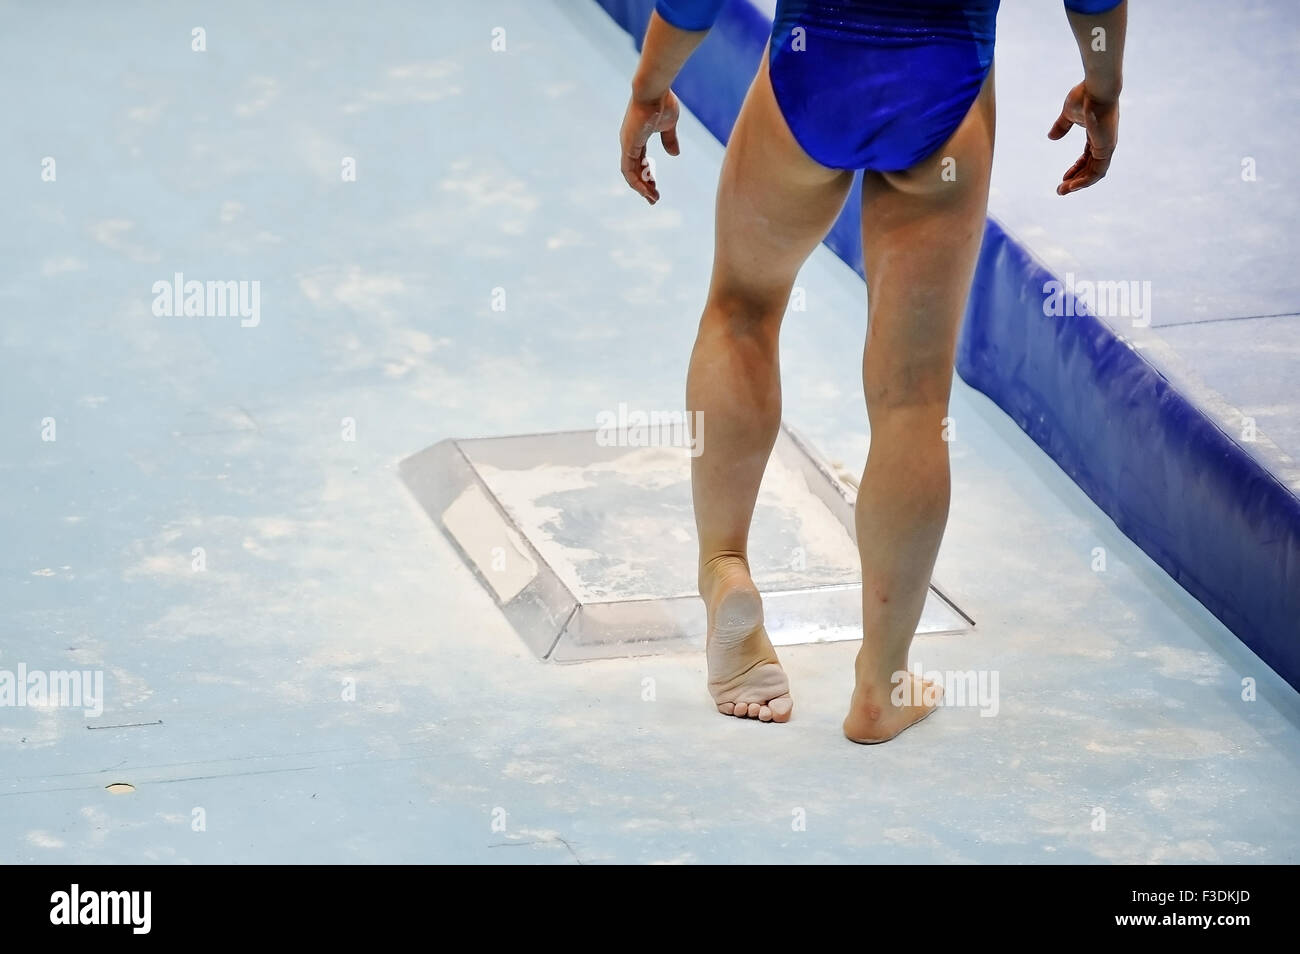 Gymnast chalking her feet before gymnastics the floor exercise Stock Photo